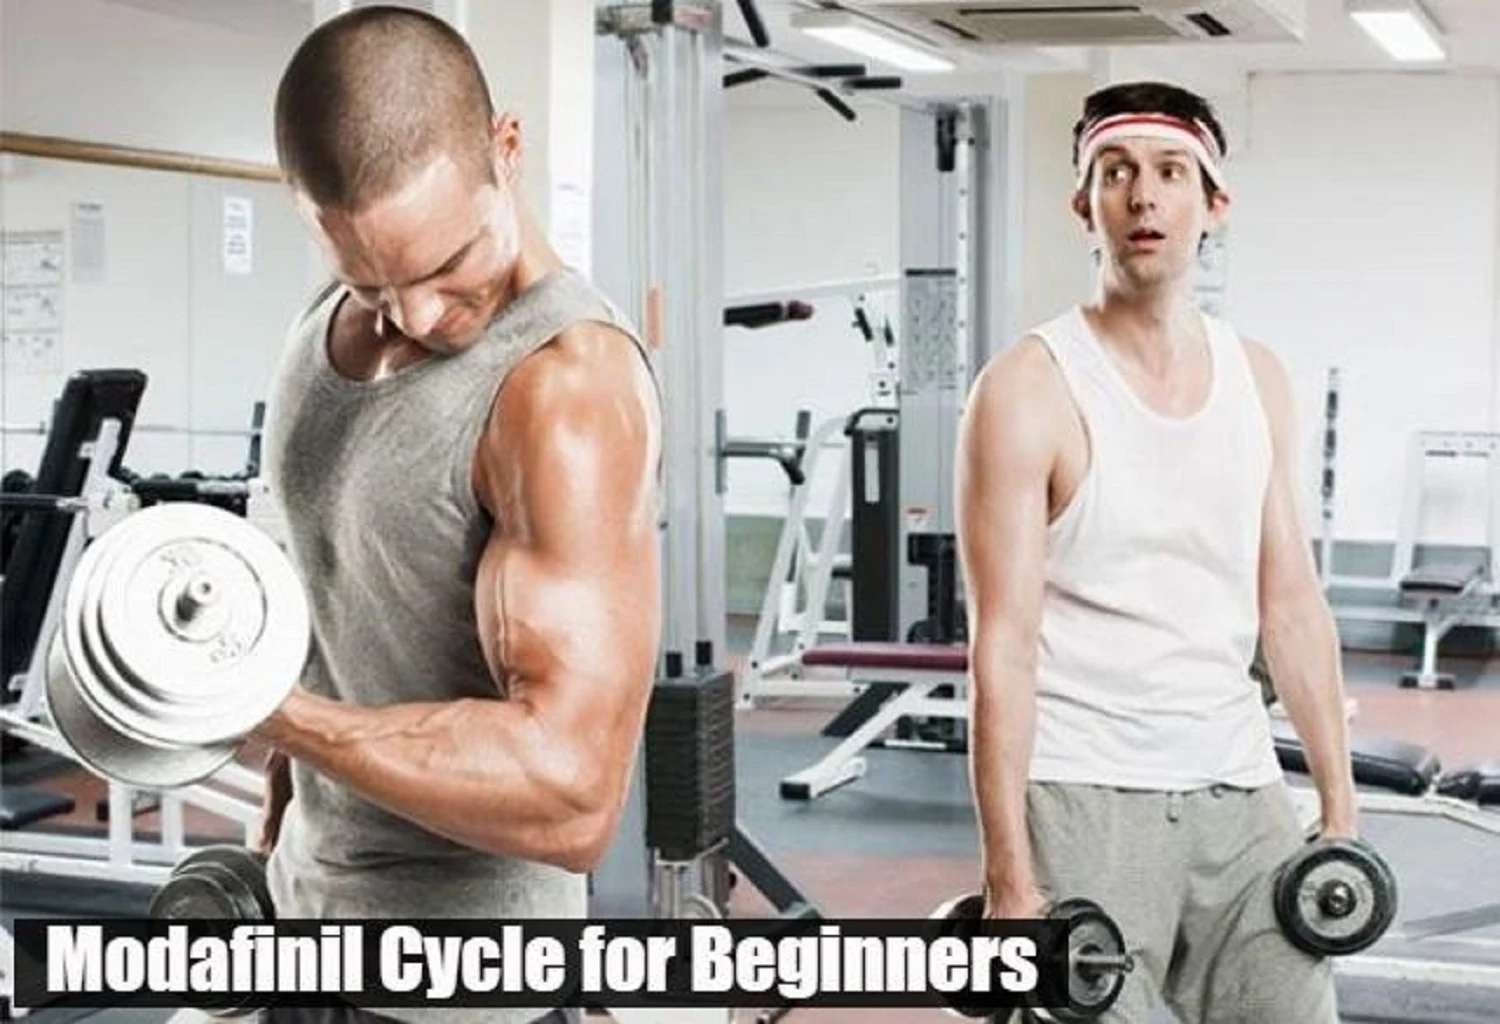 Modafinil Cycle for Beginners